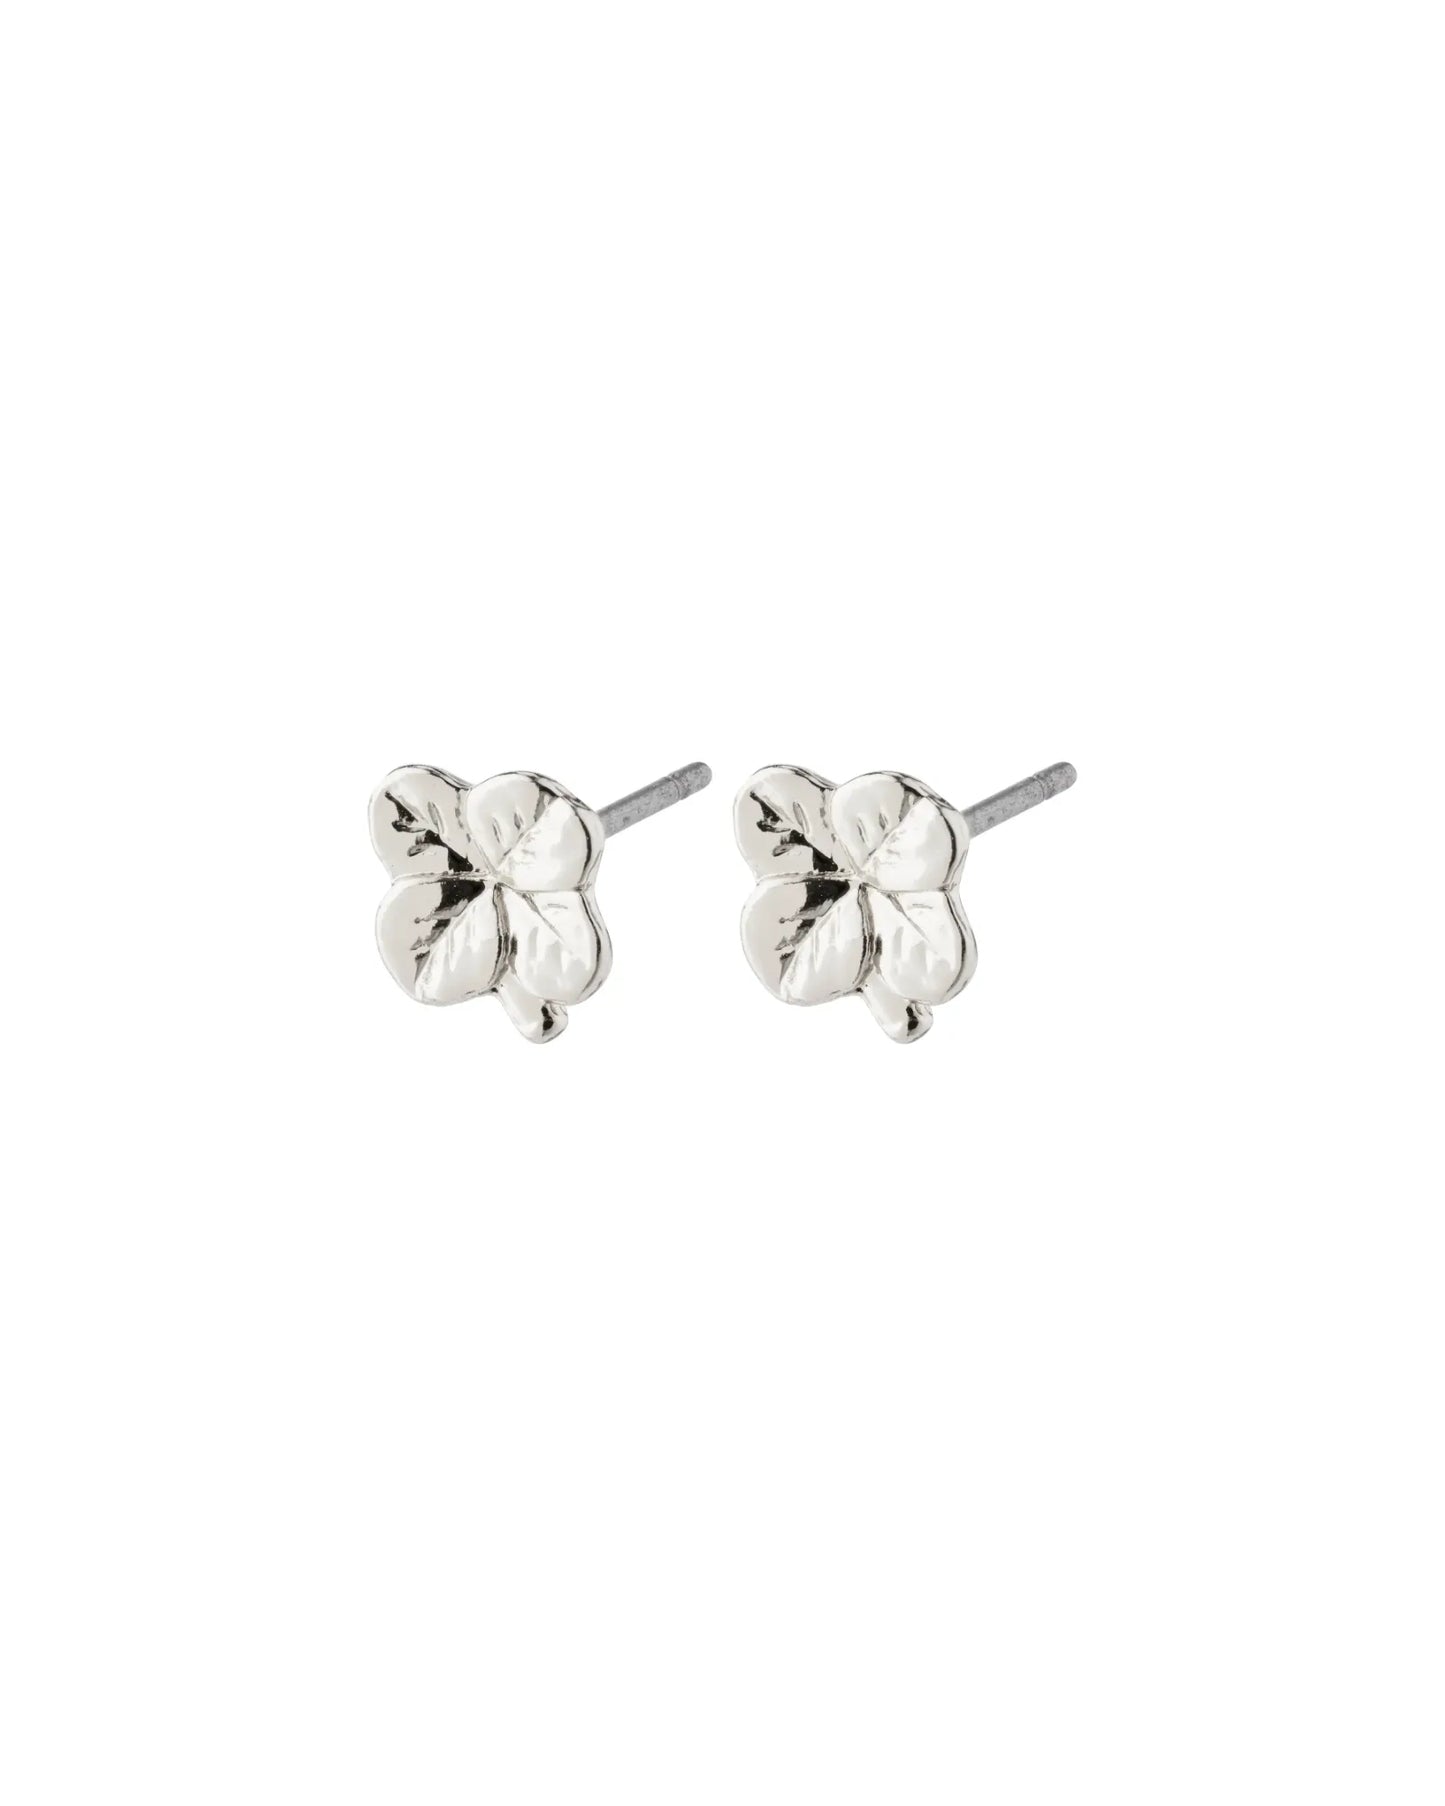 OCTAVIA Recycled Clover Earrings - Silver Plated